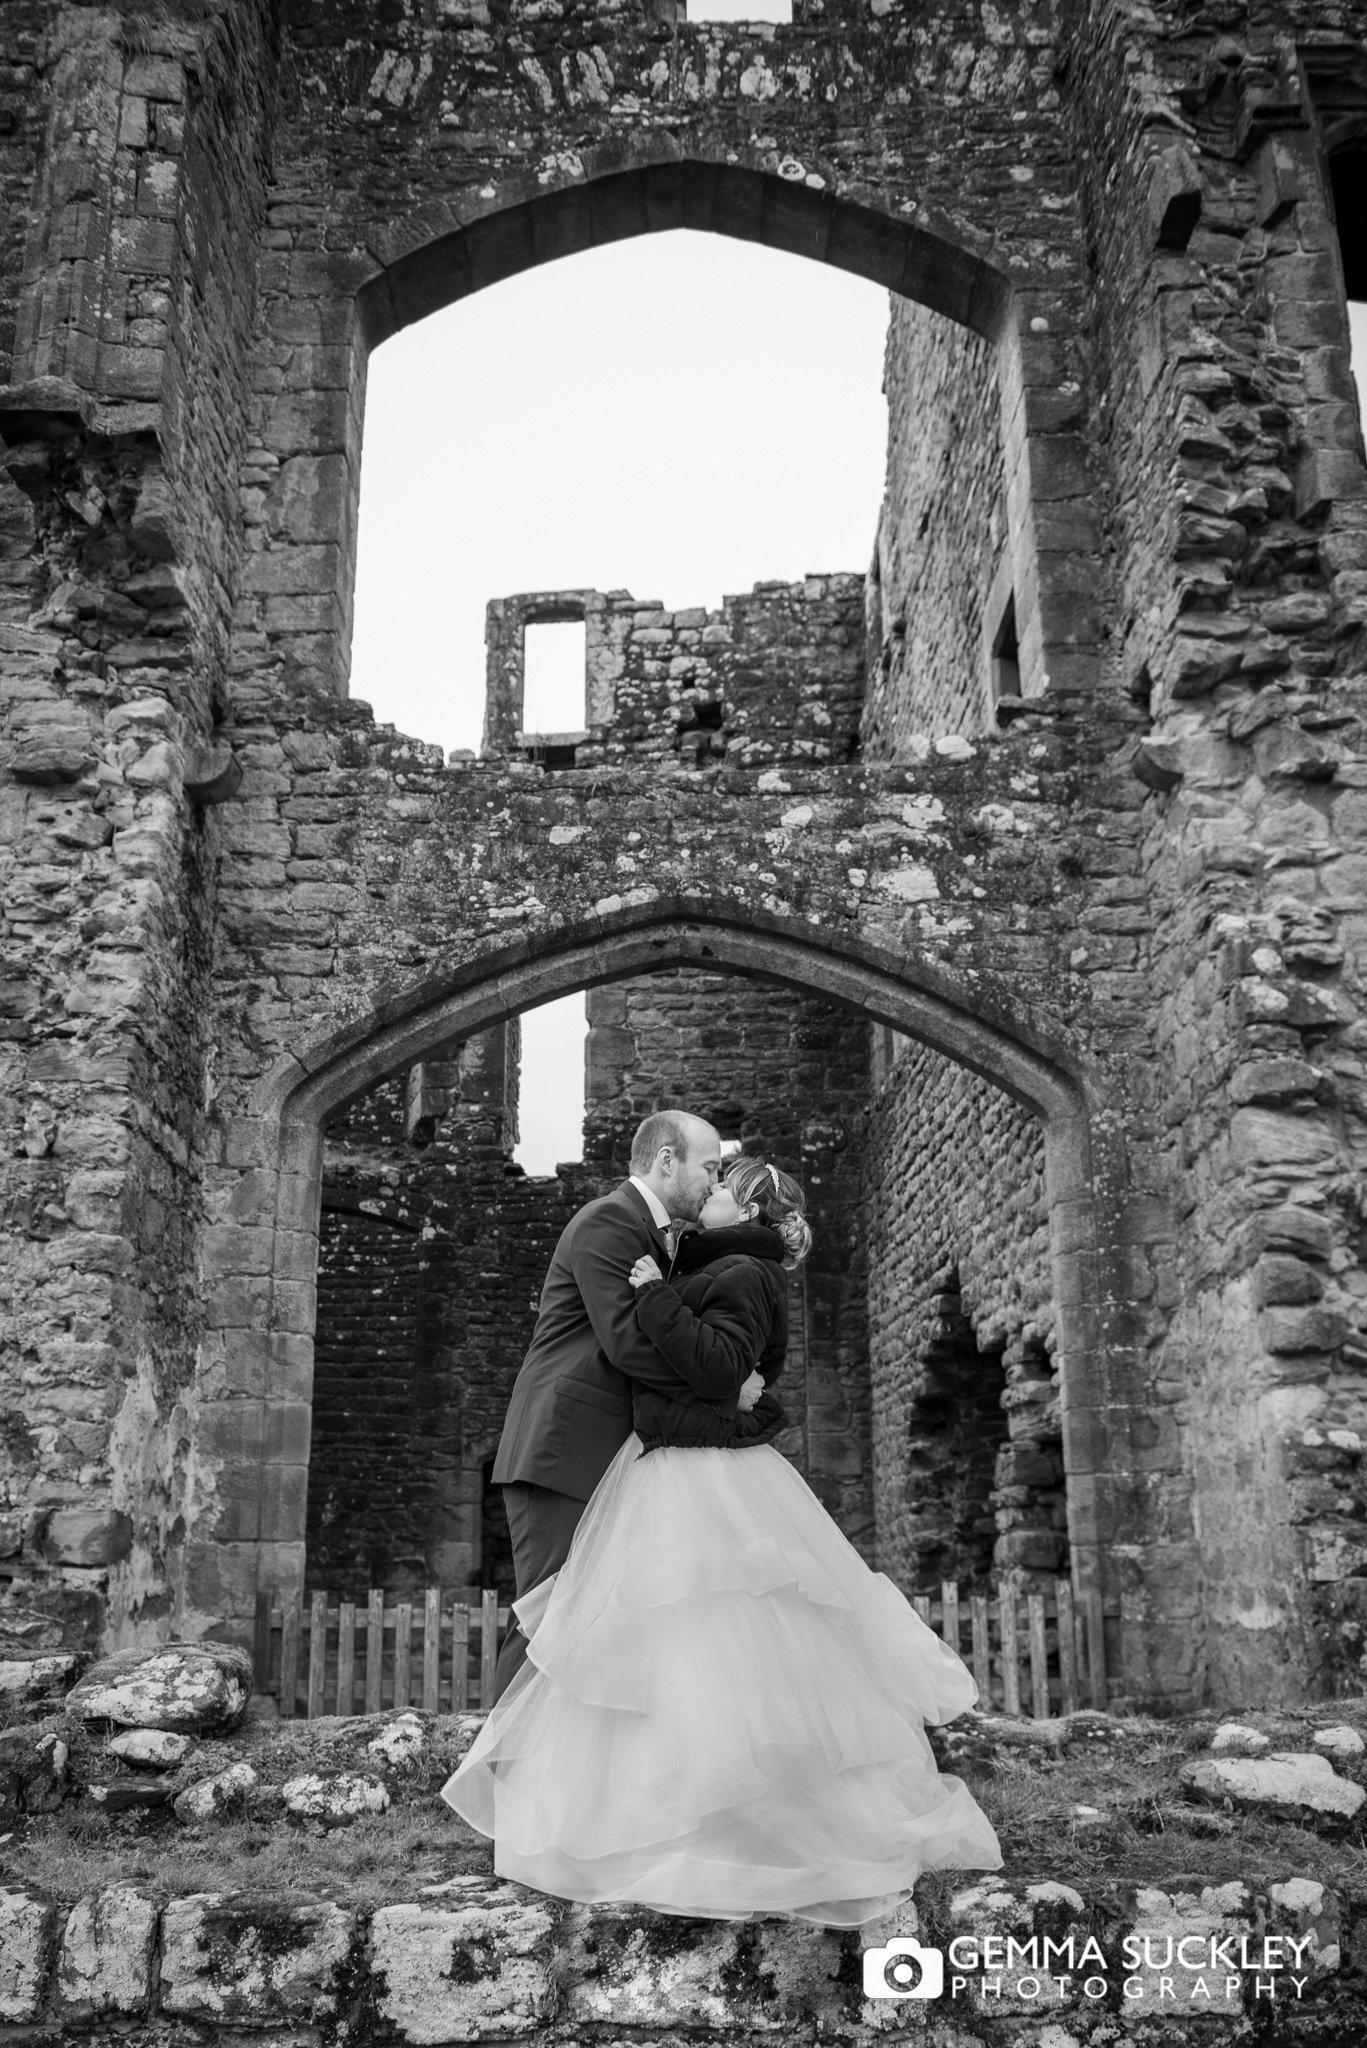 the bride and groom wedding portrait at barden tower